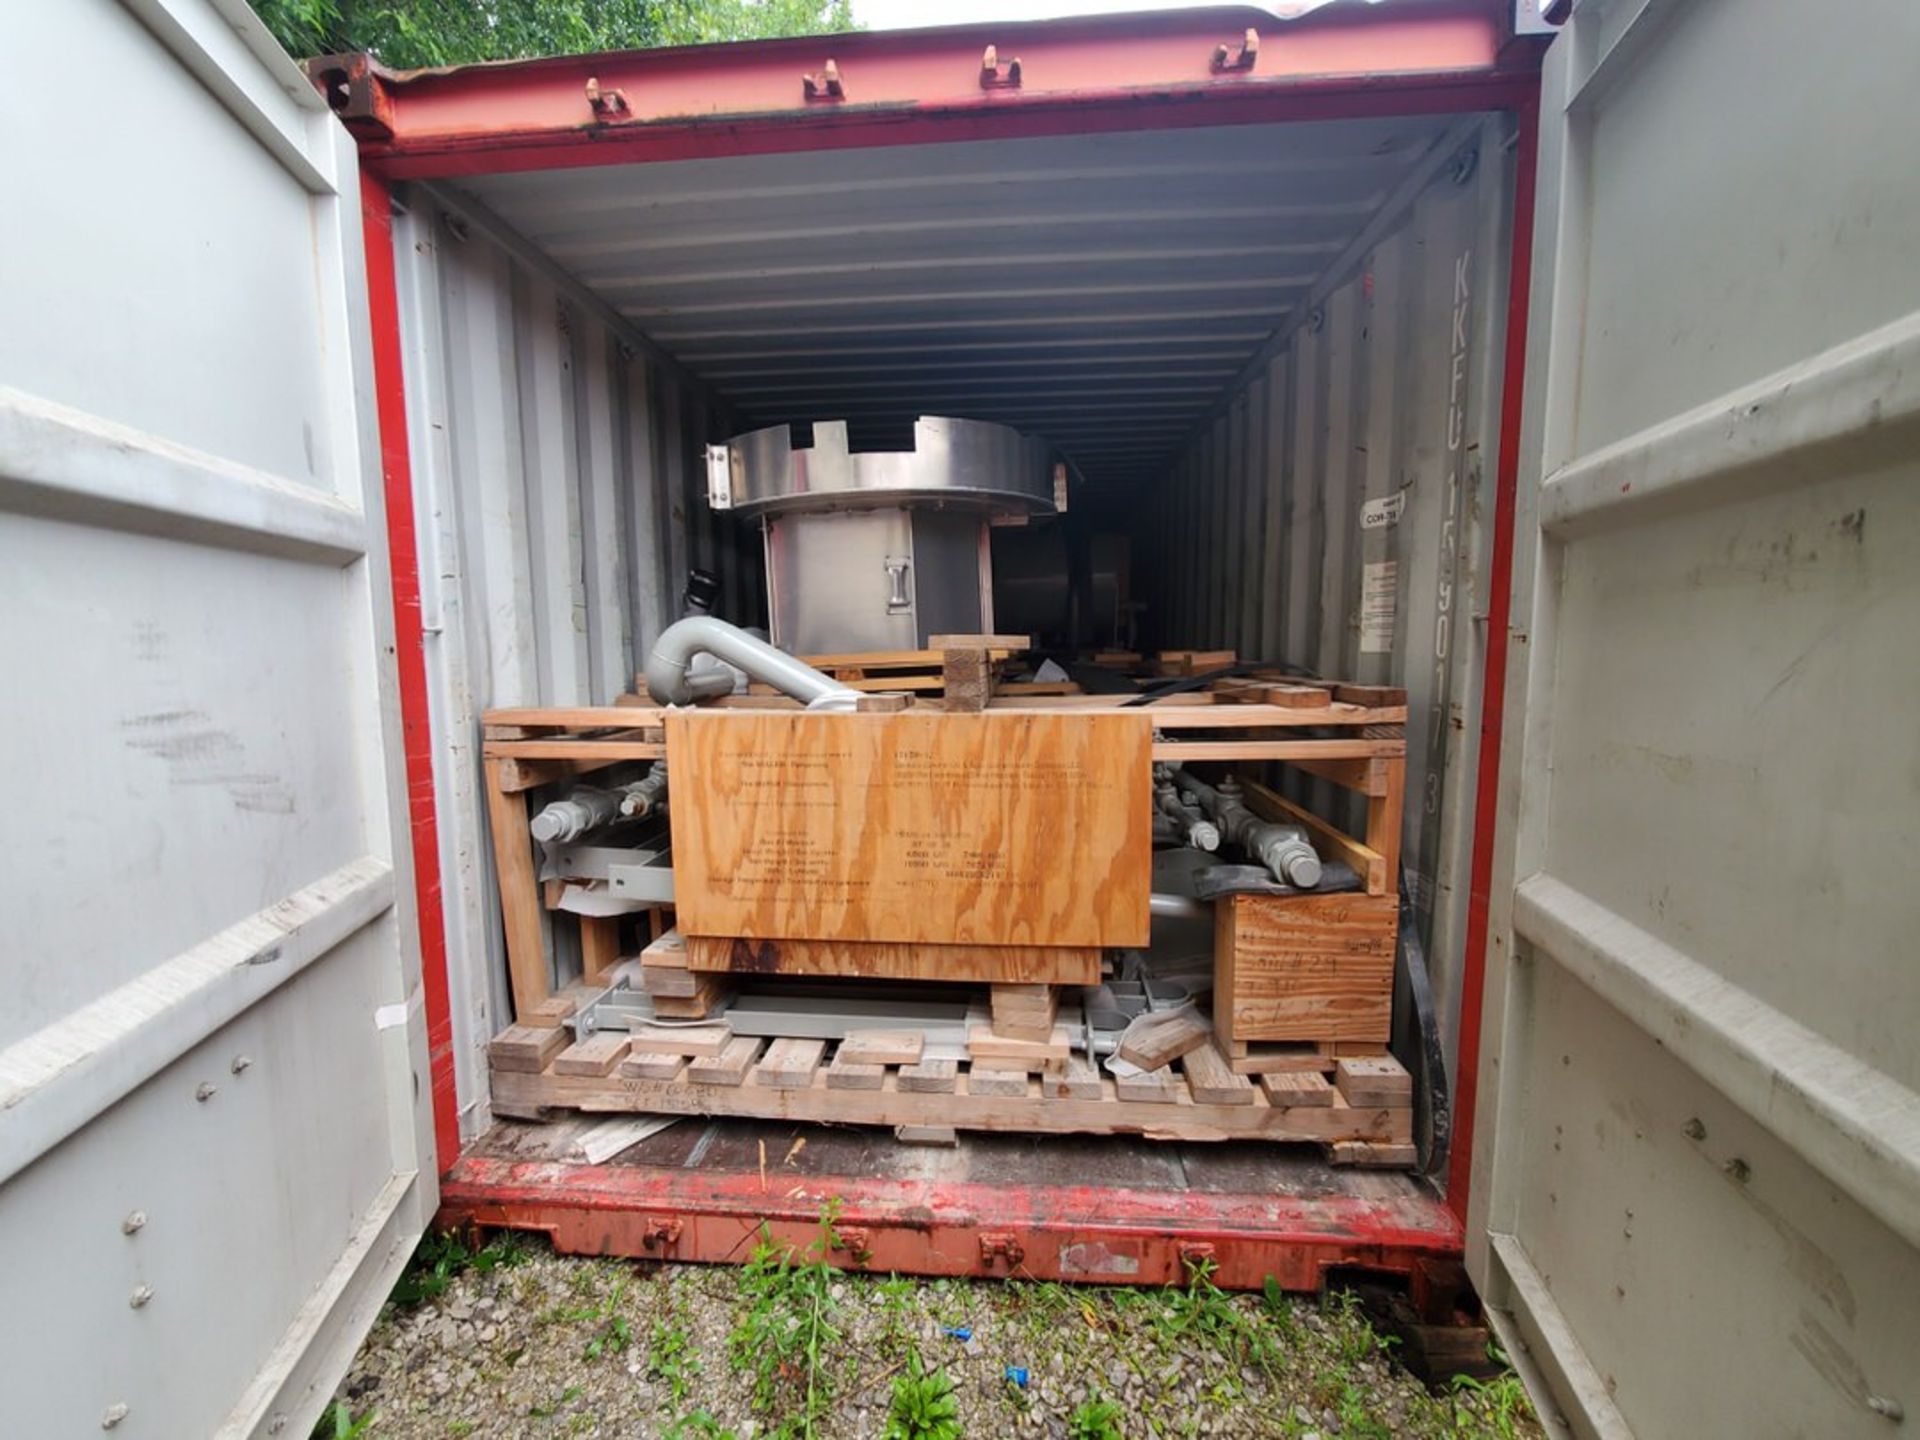 K-Line Shipping Container, Dims: 40'L x 8'W x 8'6'H; W/ Cooler Contents; To Include But Not - Image 3 of 27